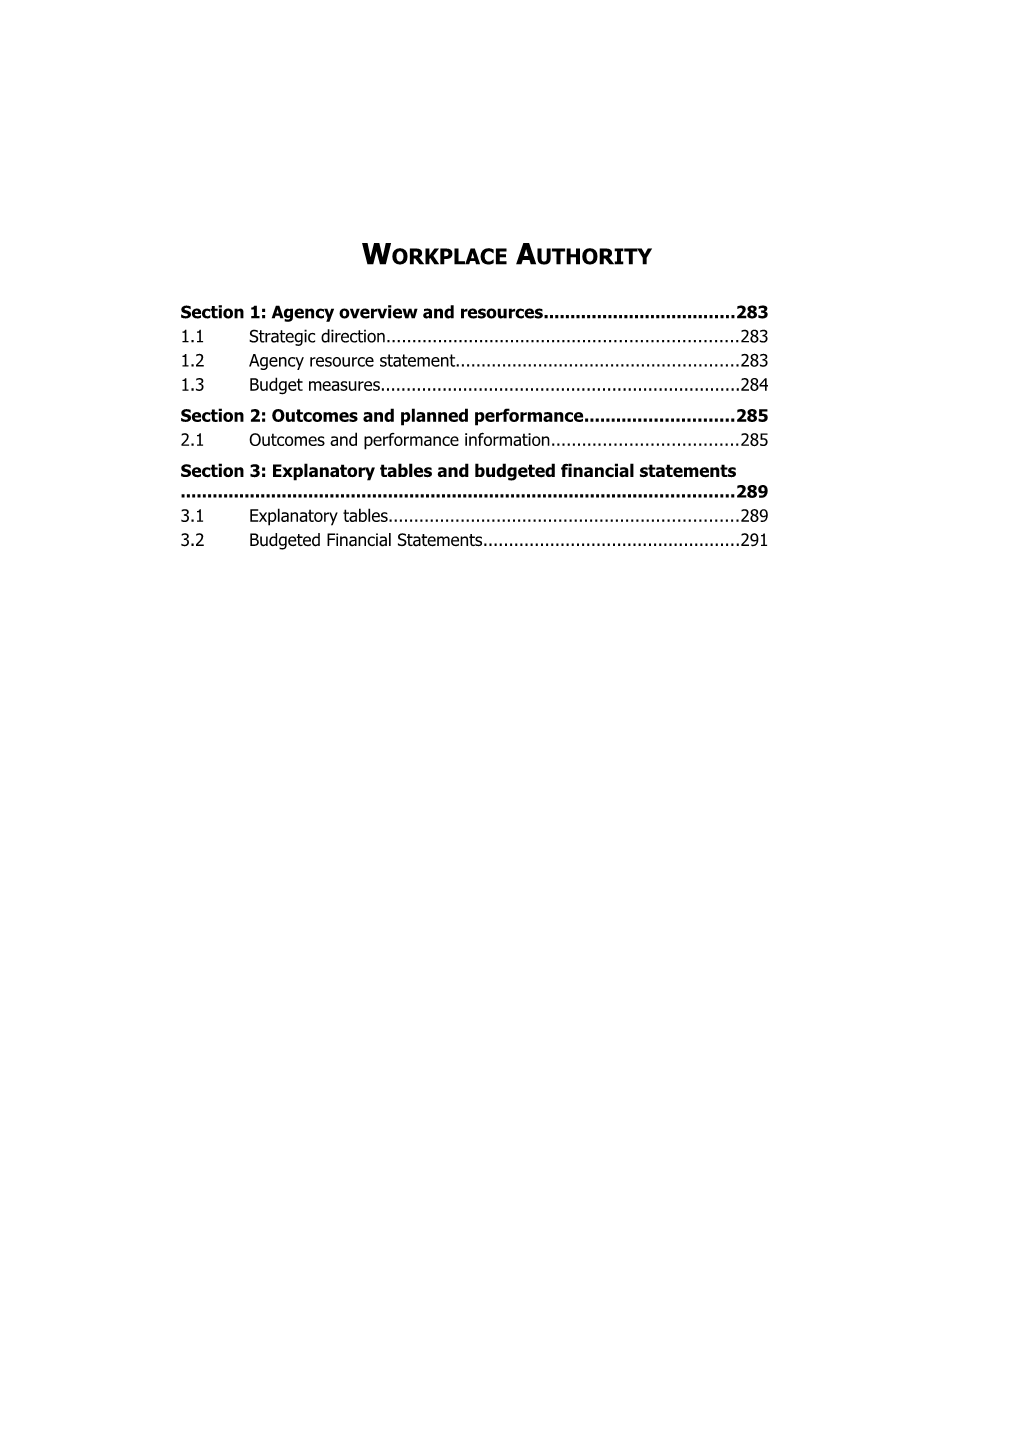 Workplace Authority Budget Statements Outcomes and Performance